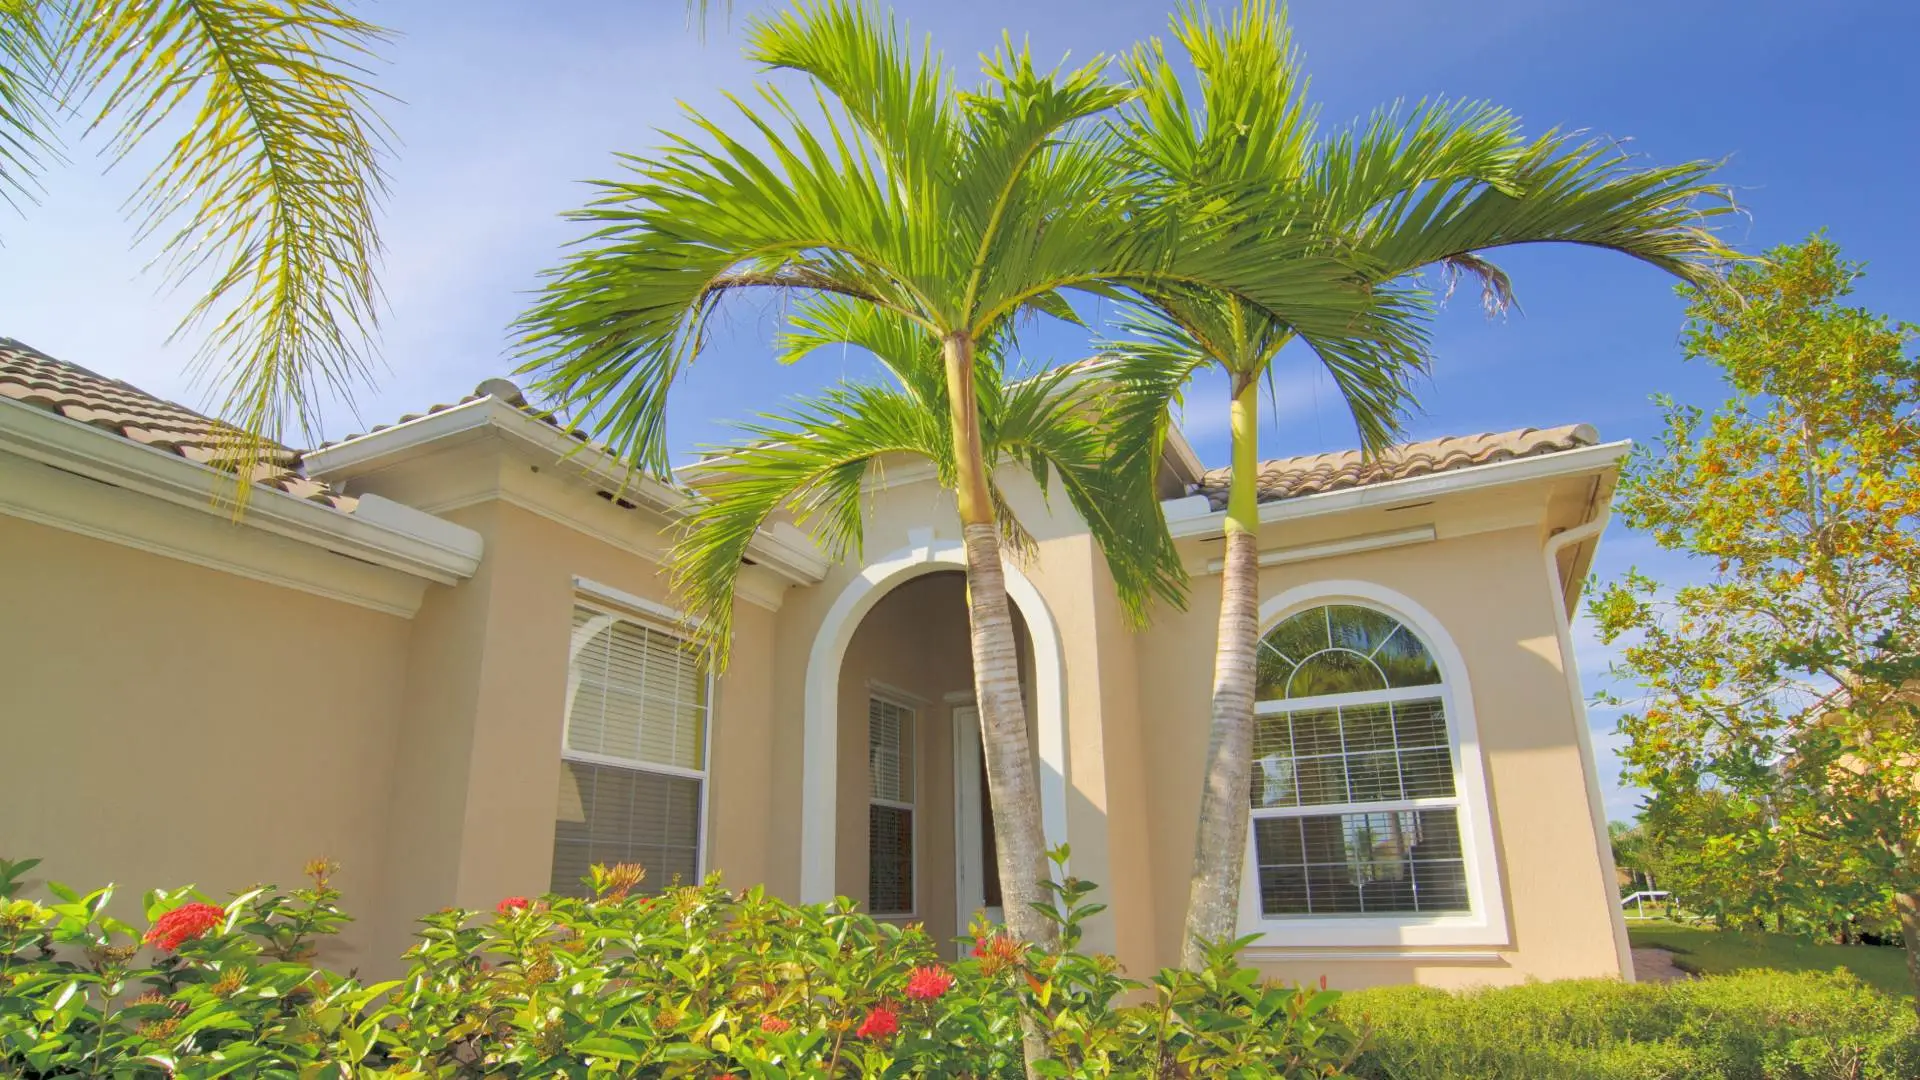 Palm trees maintained for residential home in Tampa, FL.